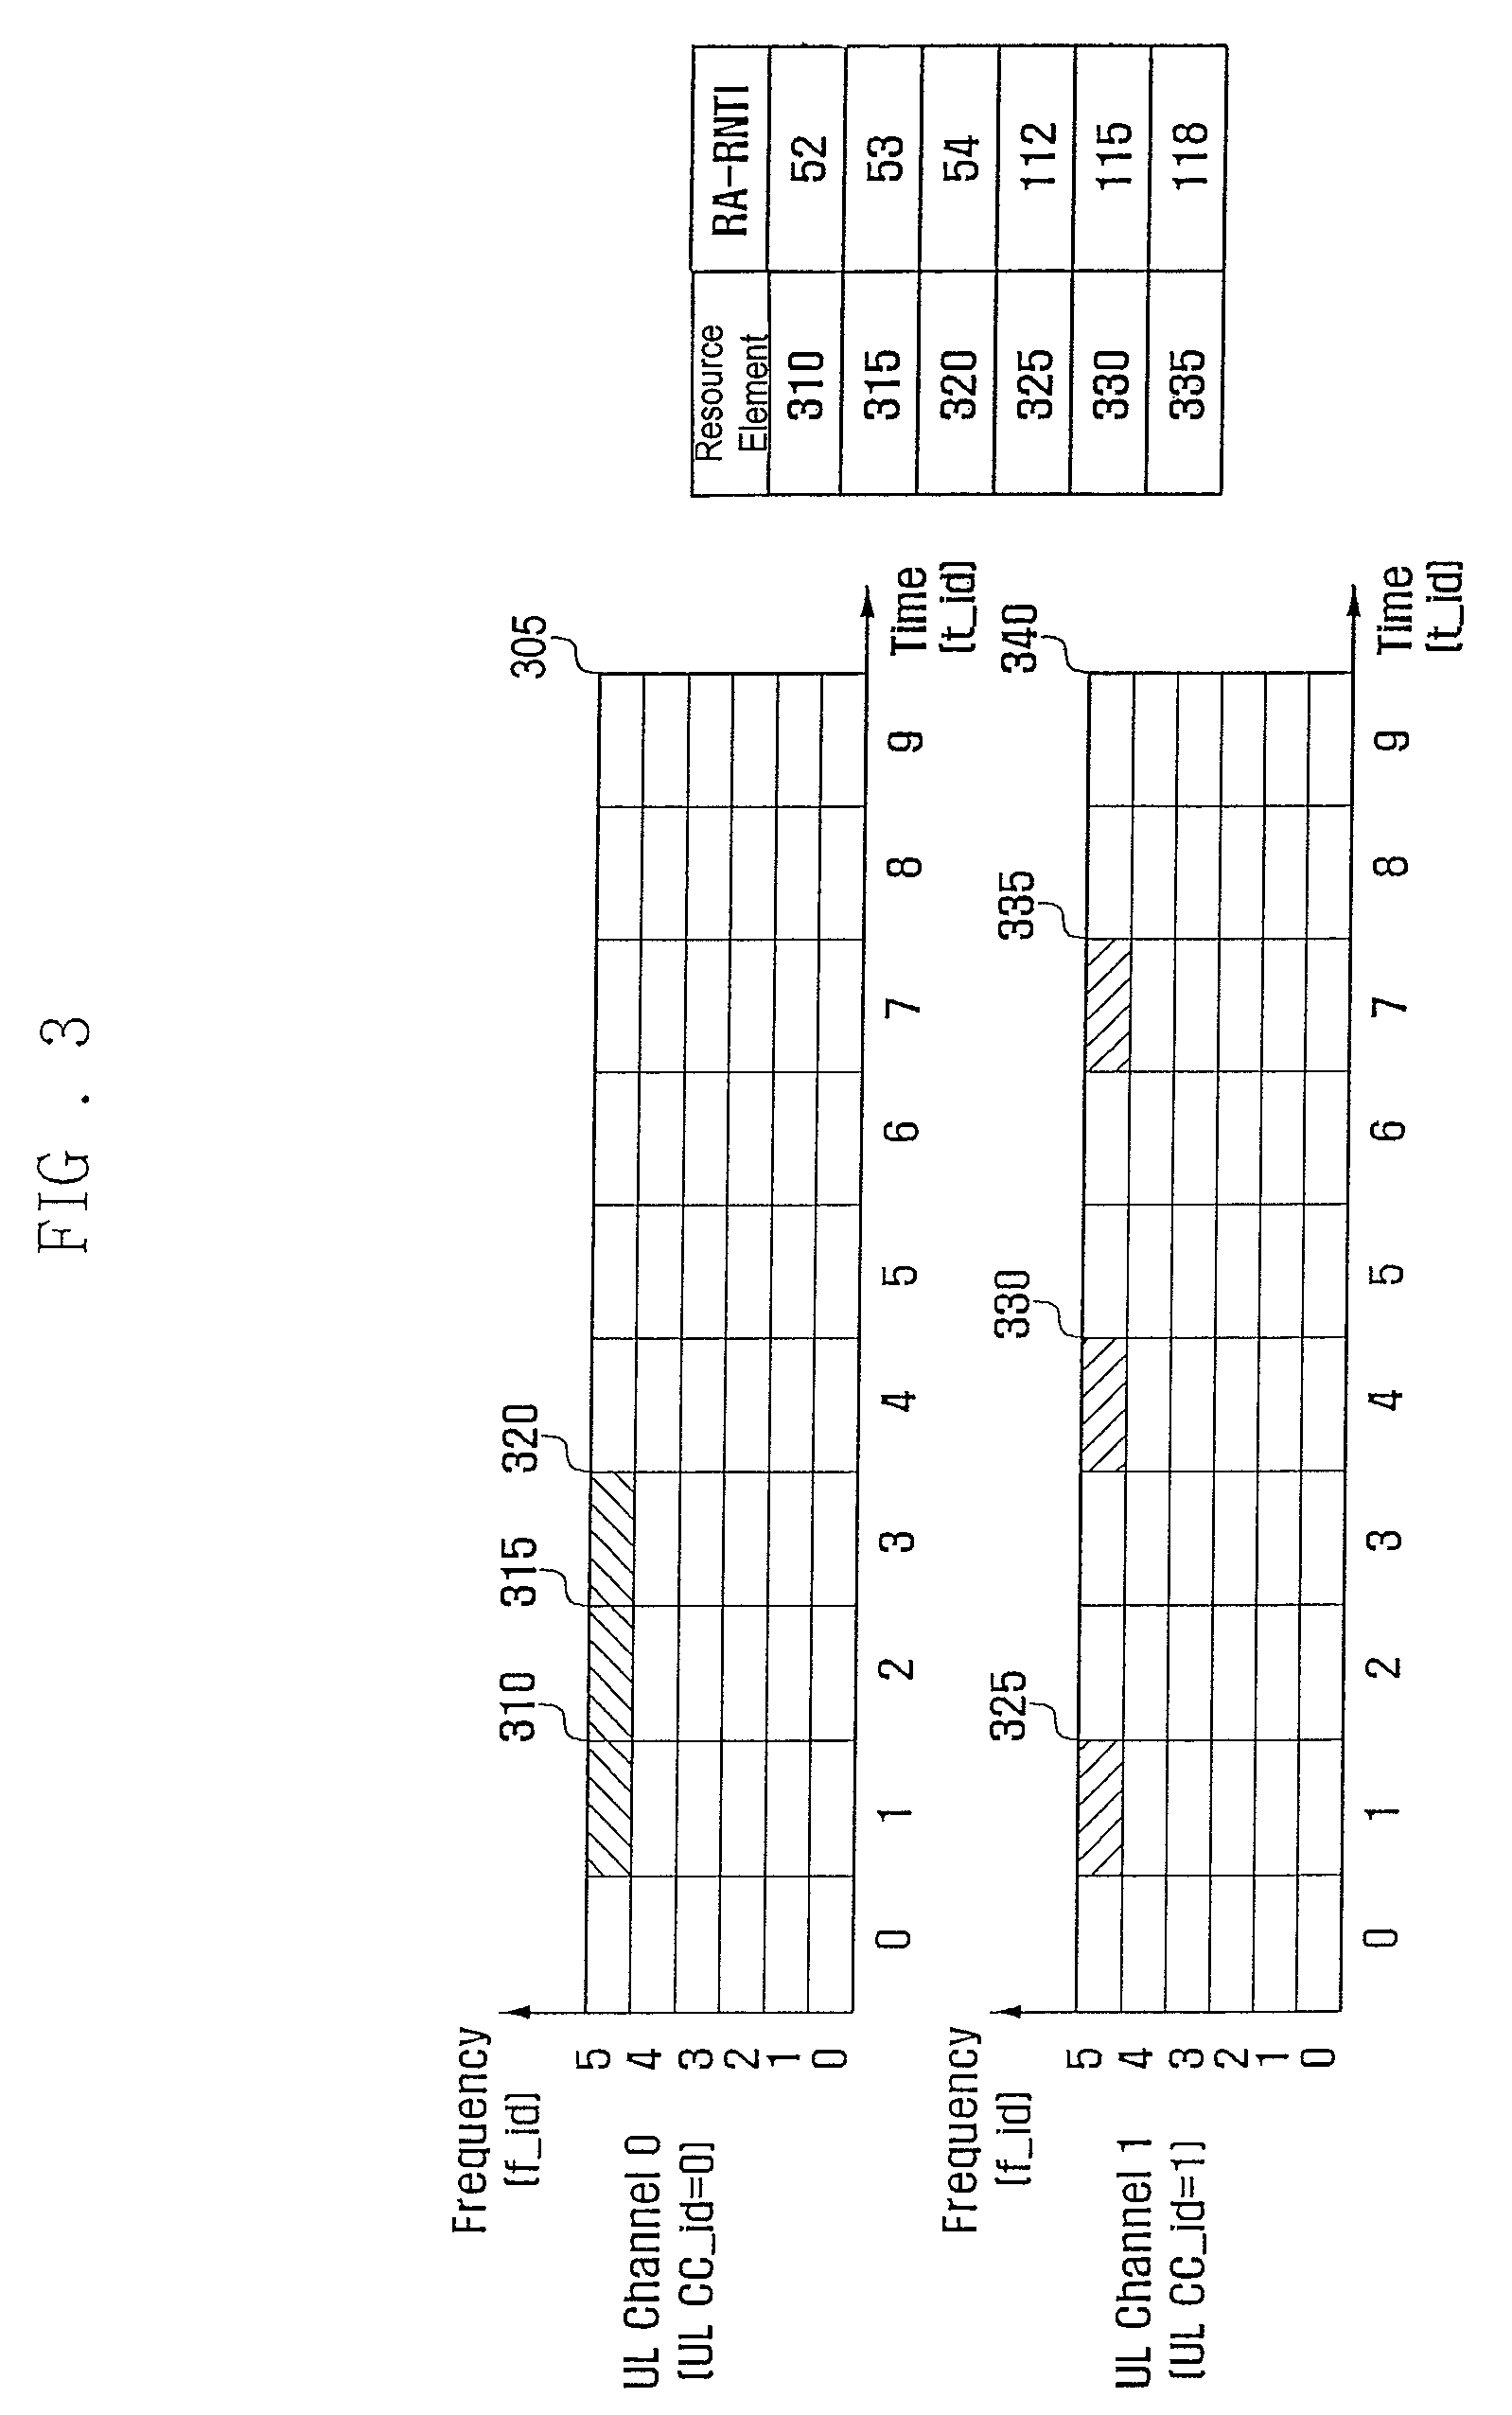 Method and apparatus for identifying downlink message responsive to random access preambles transmitted in different uplink channels in mobile communication system supporting carrier aggregation